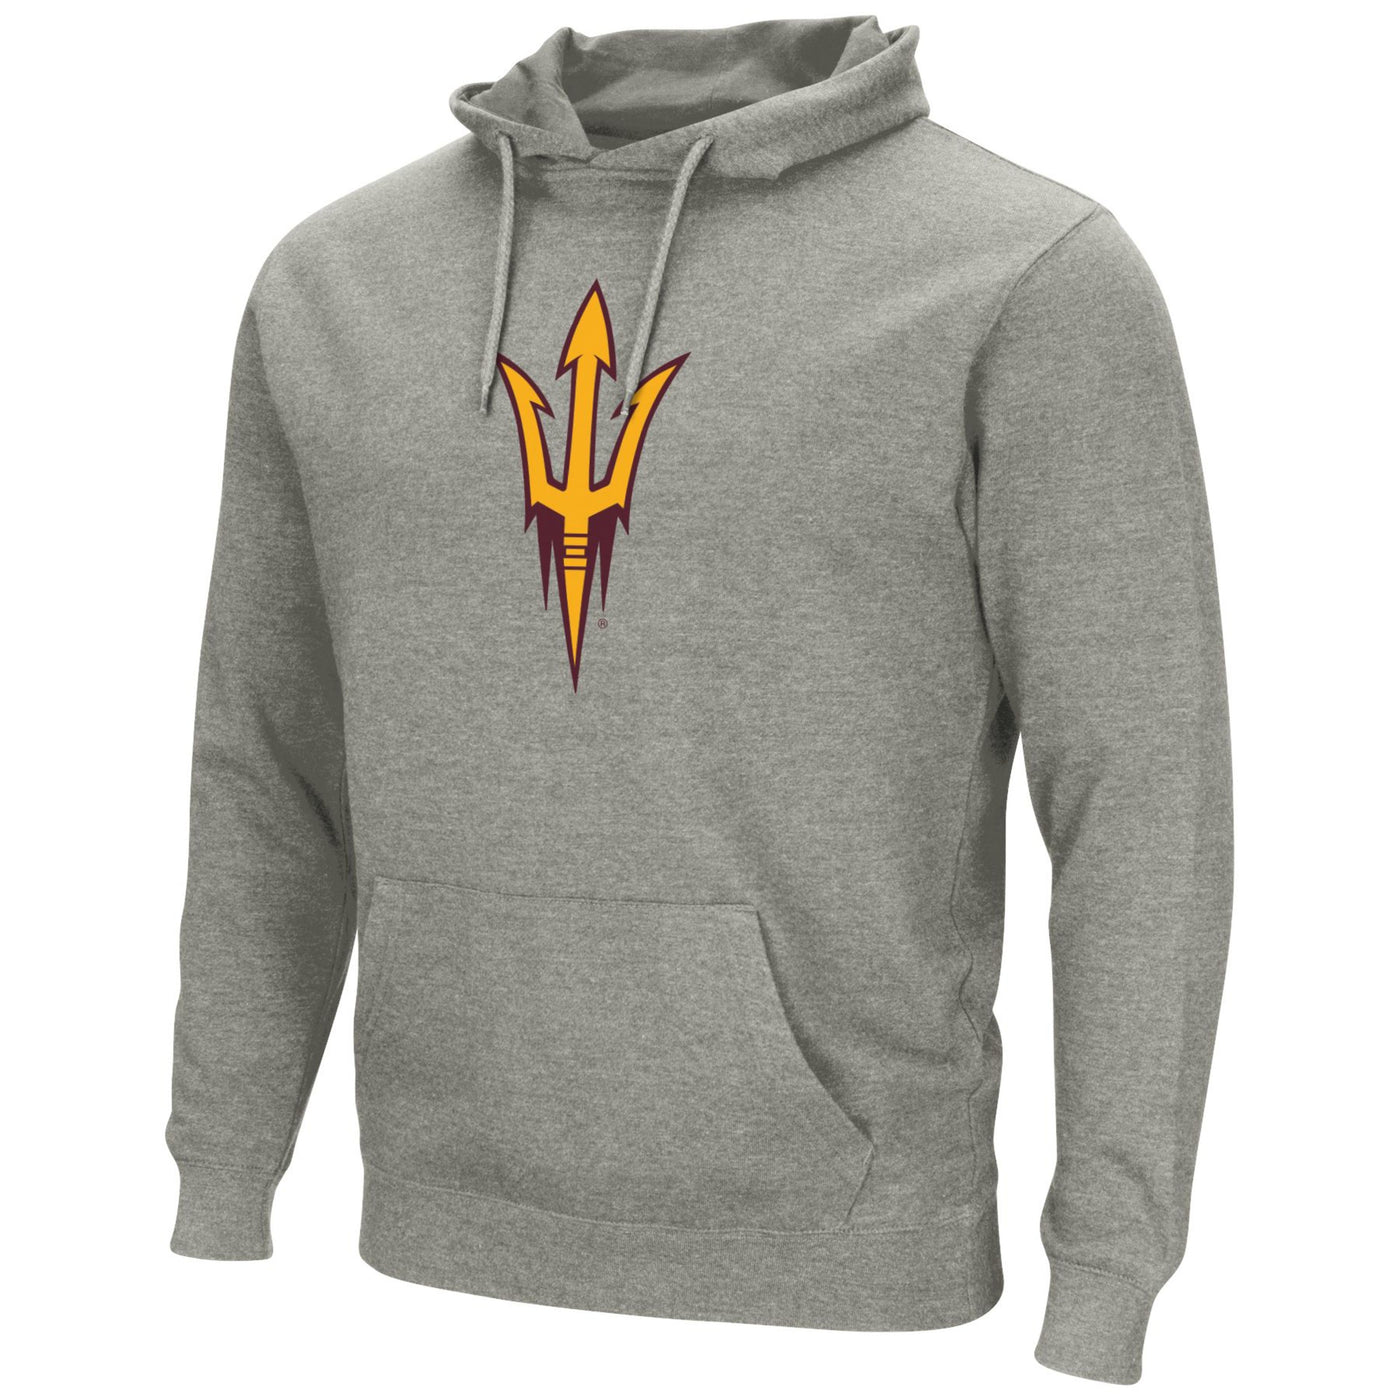 ASU heather gray hoody with drawstring, front pocket, and a maroon and gold pitchfork